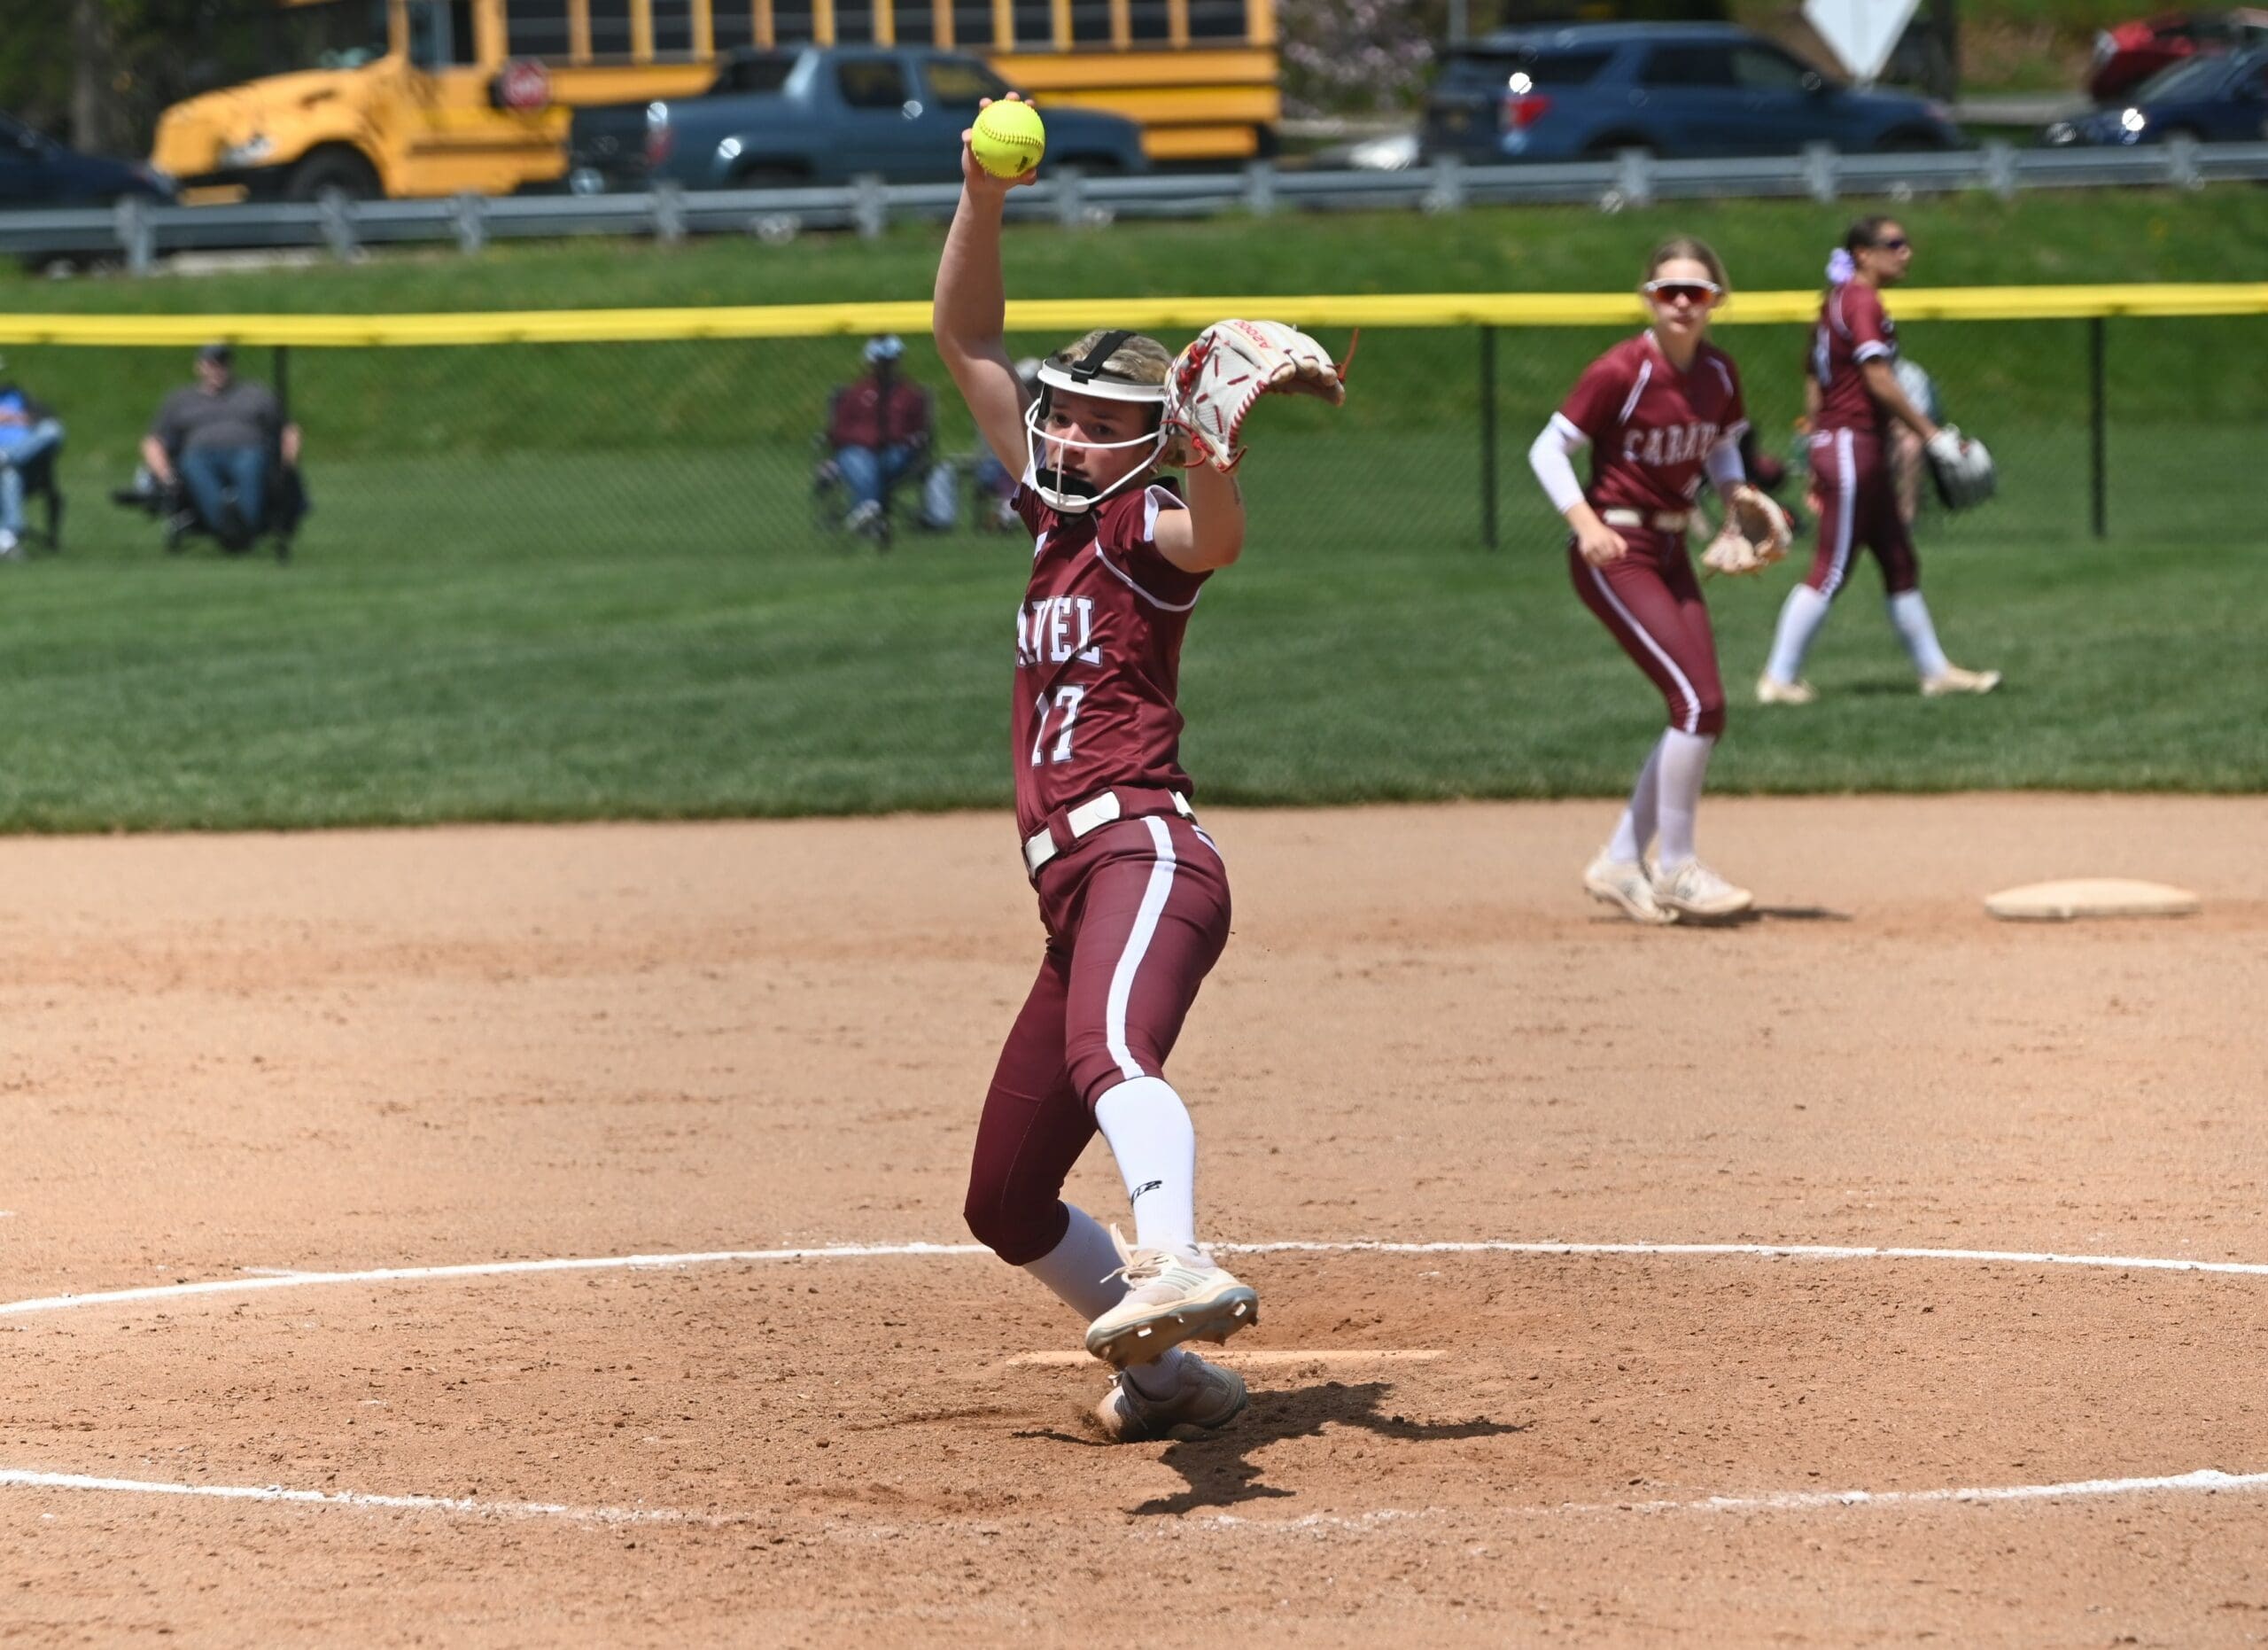 Caravel Softball Kasey Xenidis throws a pitch during a game. Photo by Nick Halliday scaled